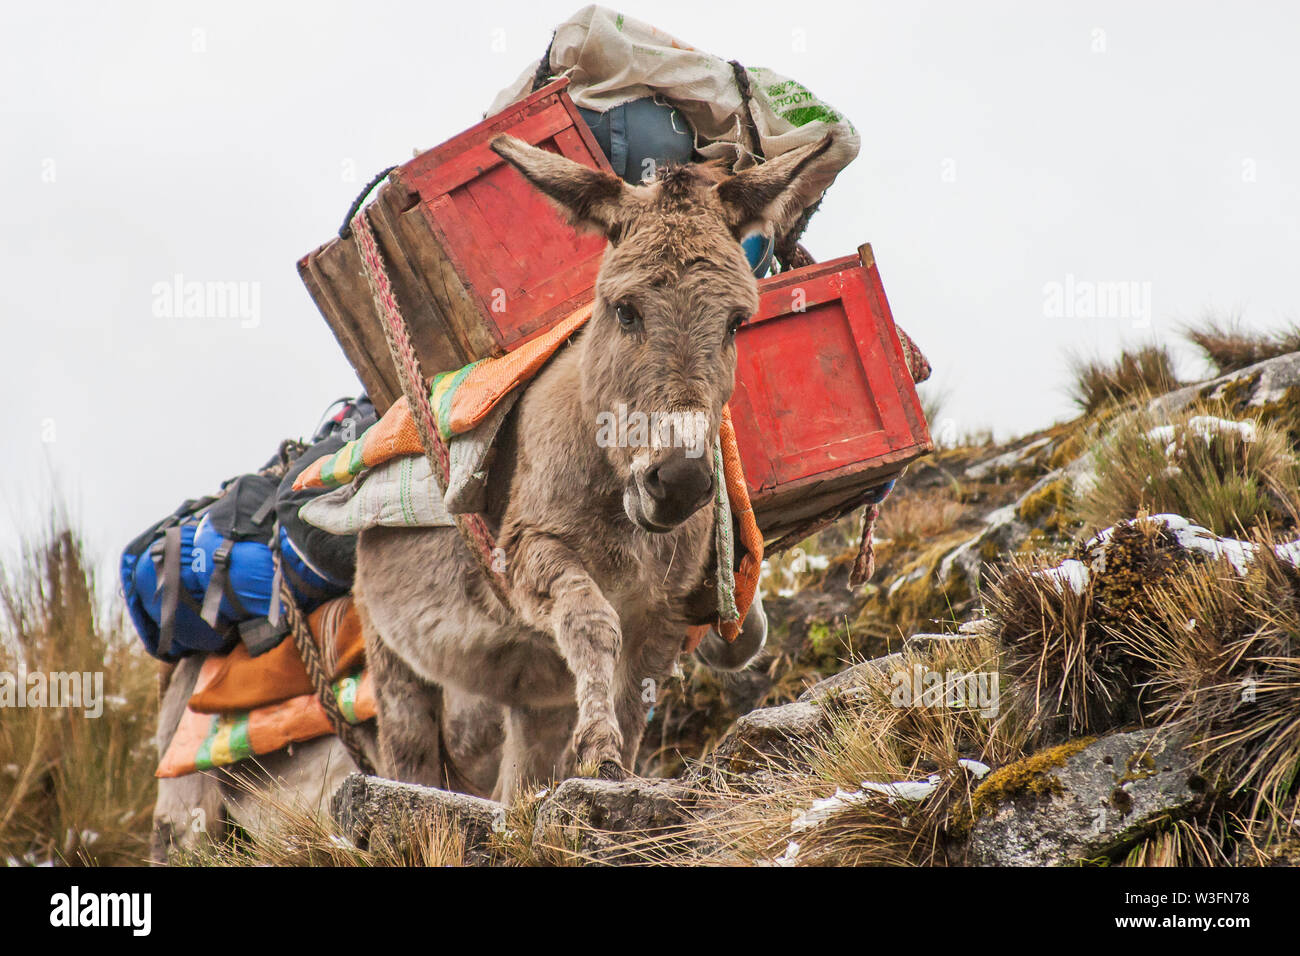 Donkey carrying cargo for trekkers in Peru. Stock Photo